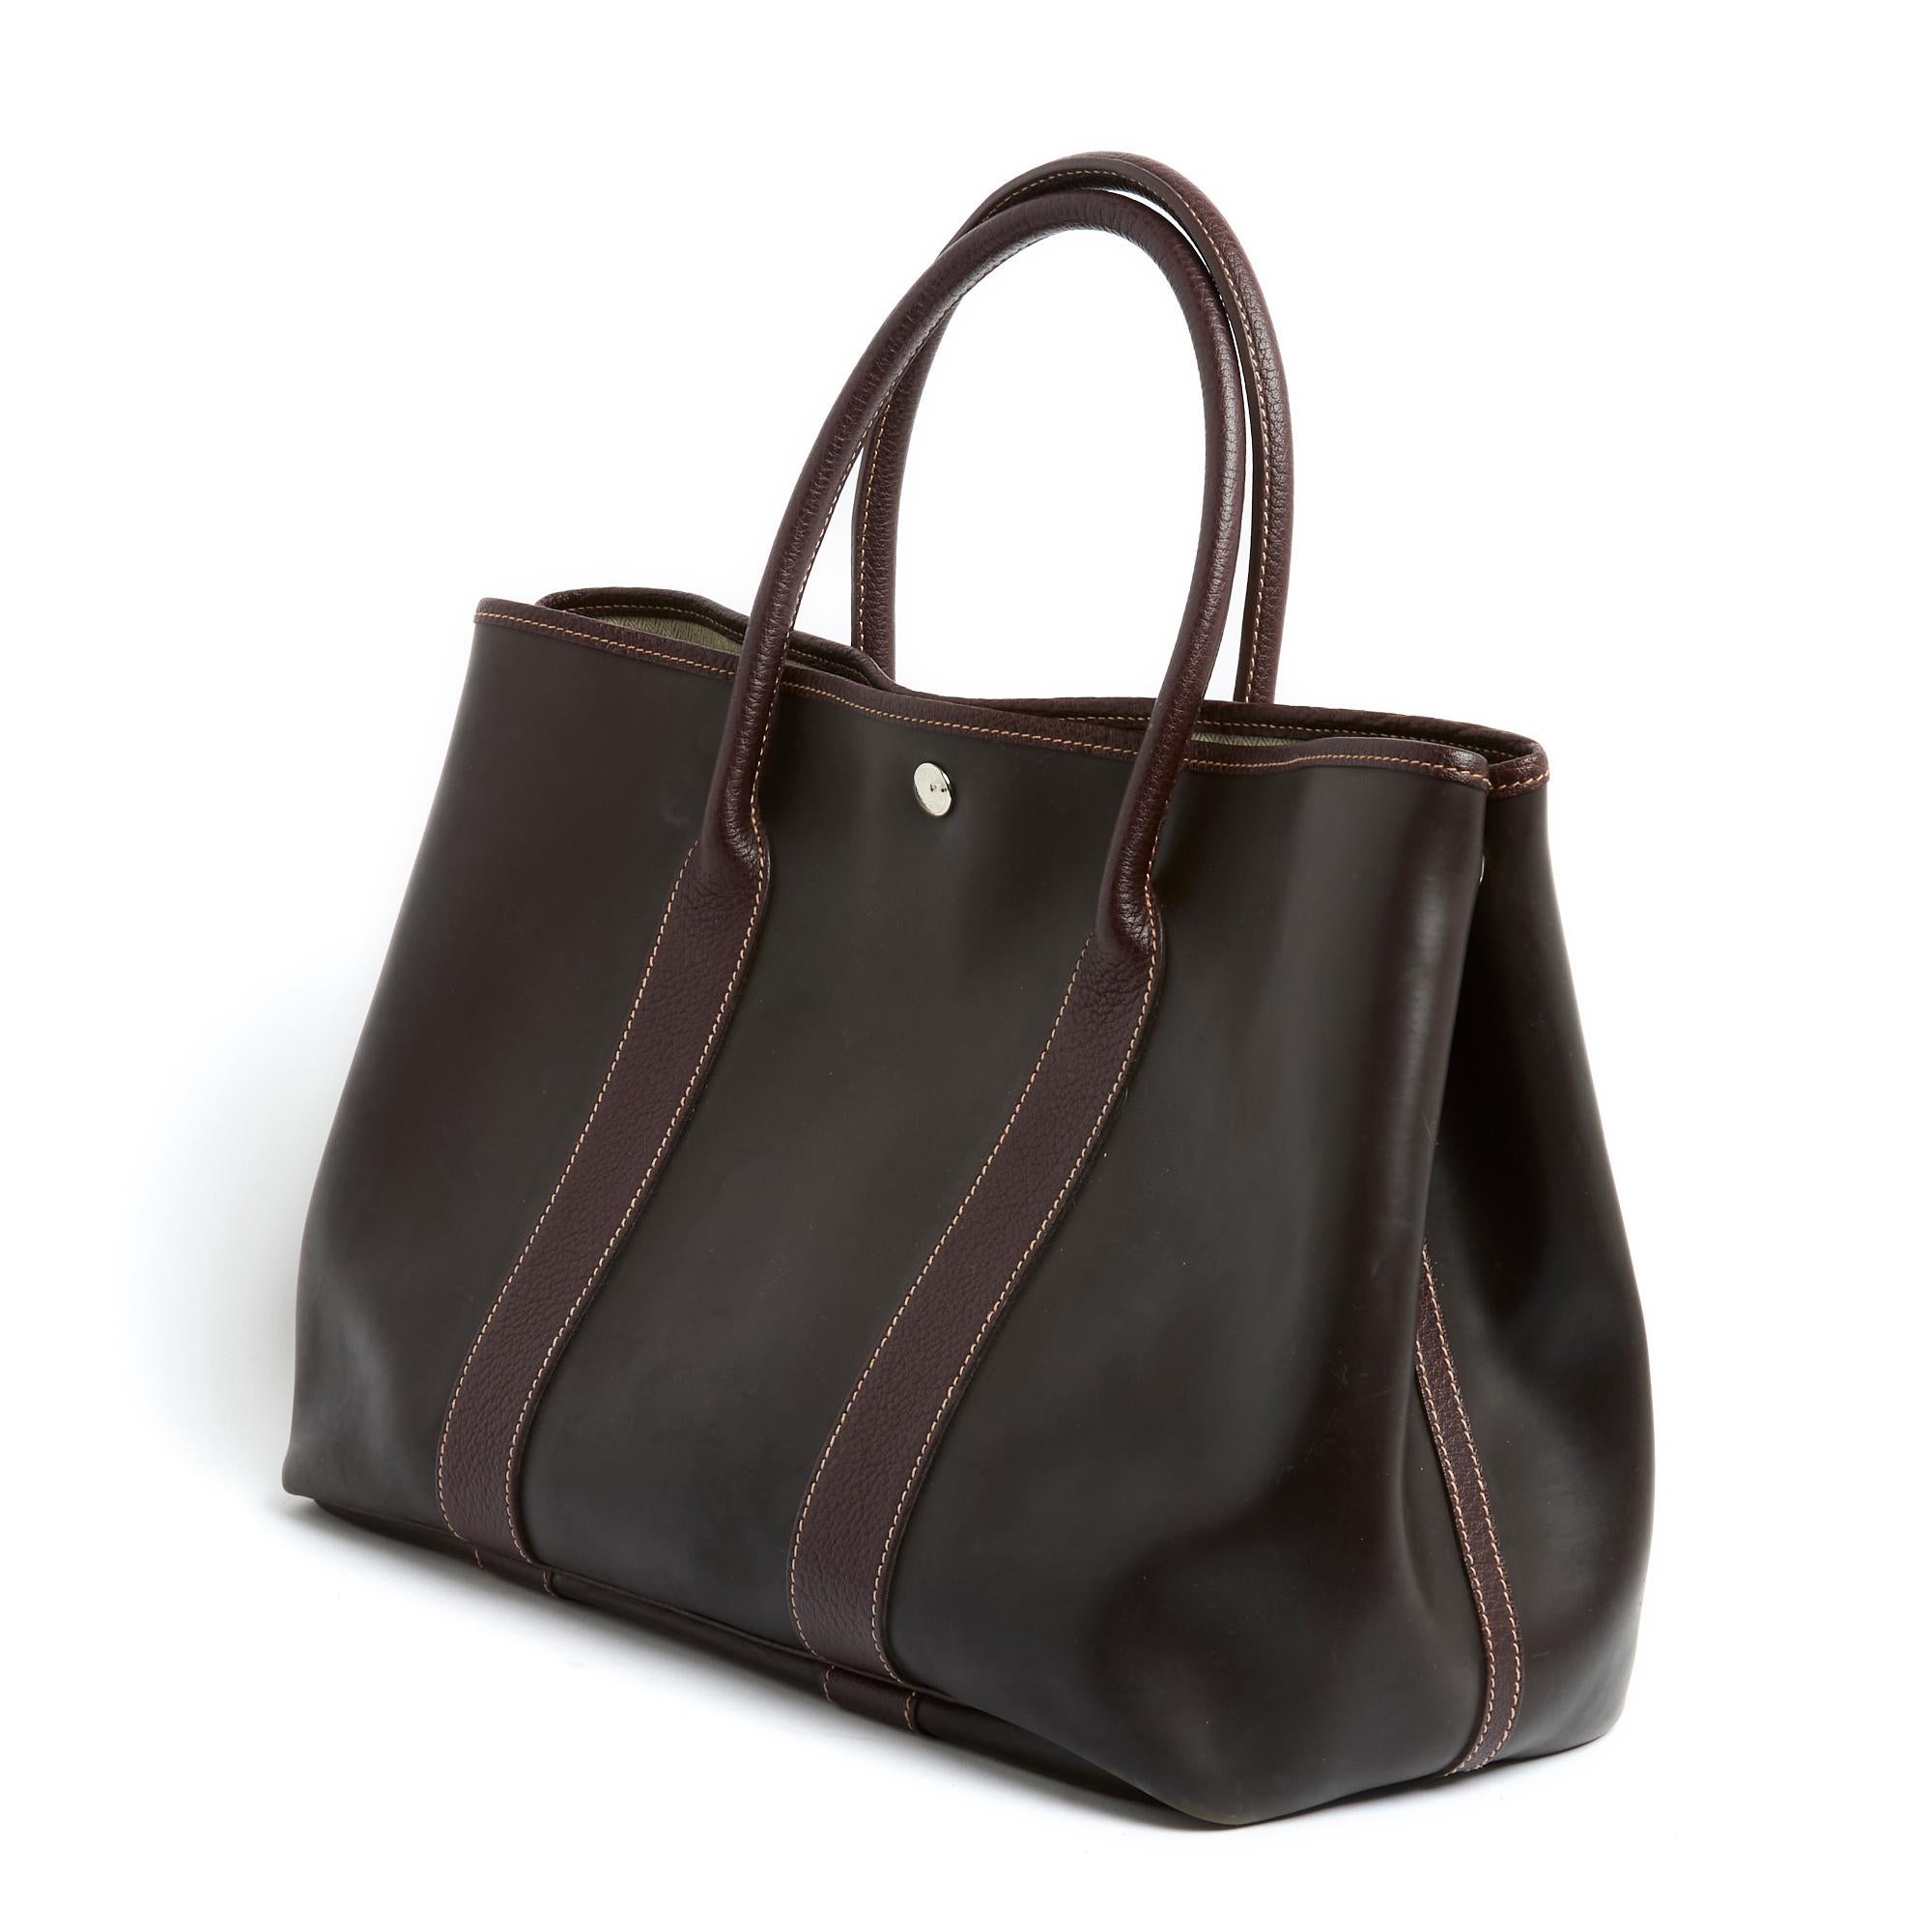 Hermès bag, Garden Party model, MM format, in Amazonia leather (Hermès vegan leather) and dark brown Negonda leather, 2 tightening snaps on each side of the bag, ecru canvas interior, circa 2004. Width 36 cm x height 25 cm x depth 16 cm . The